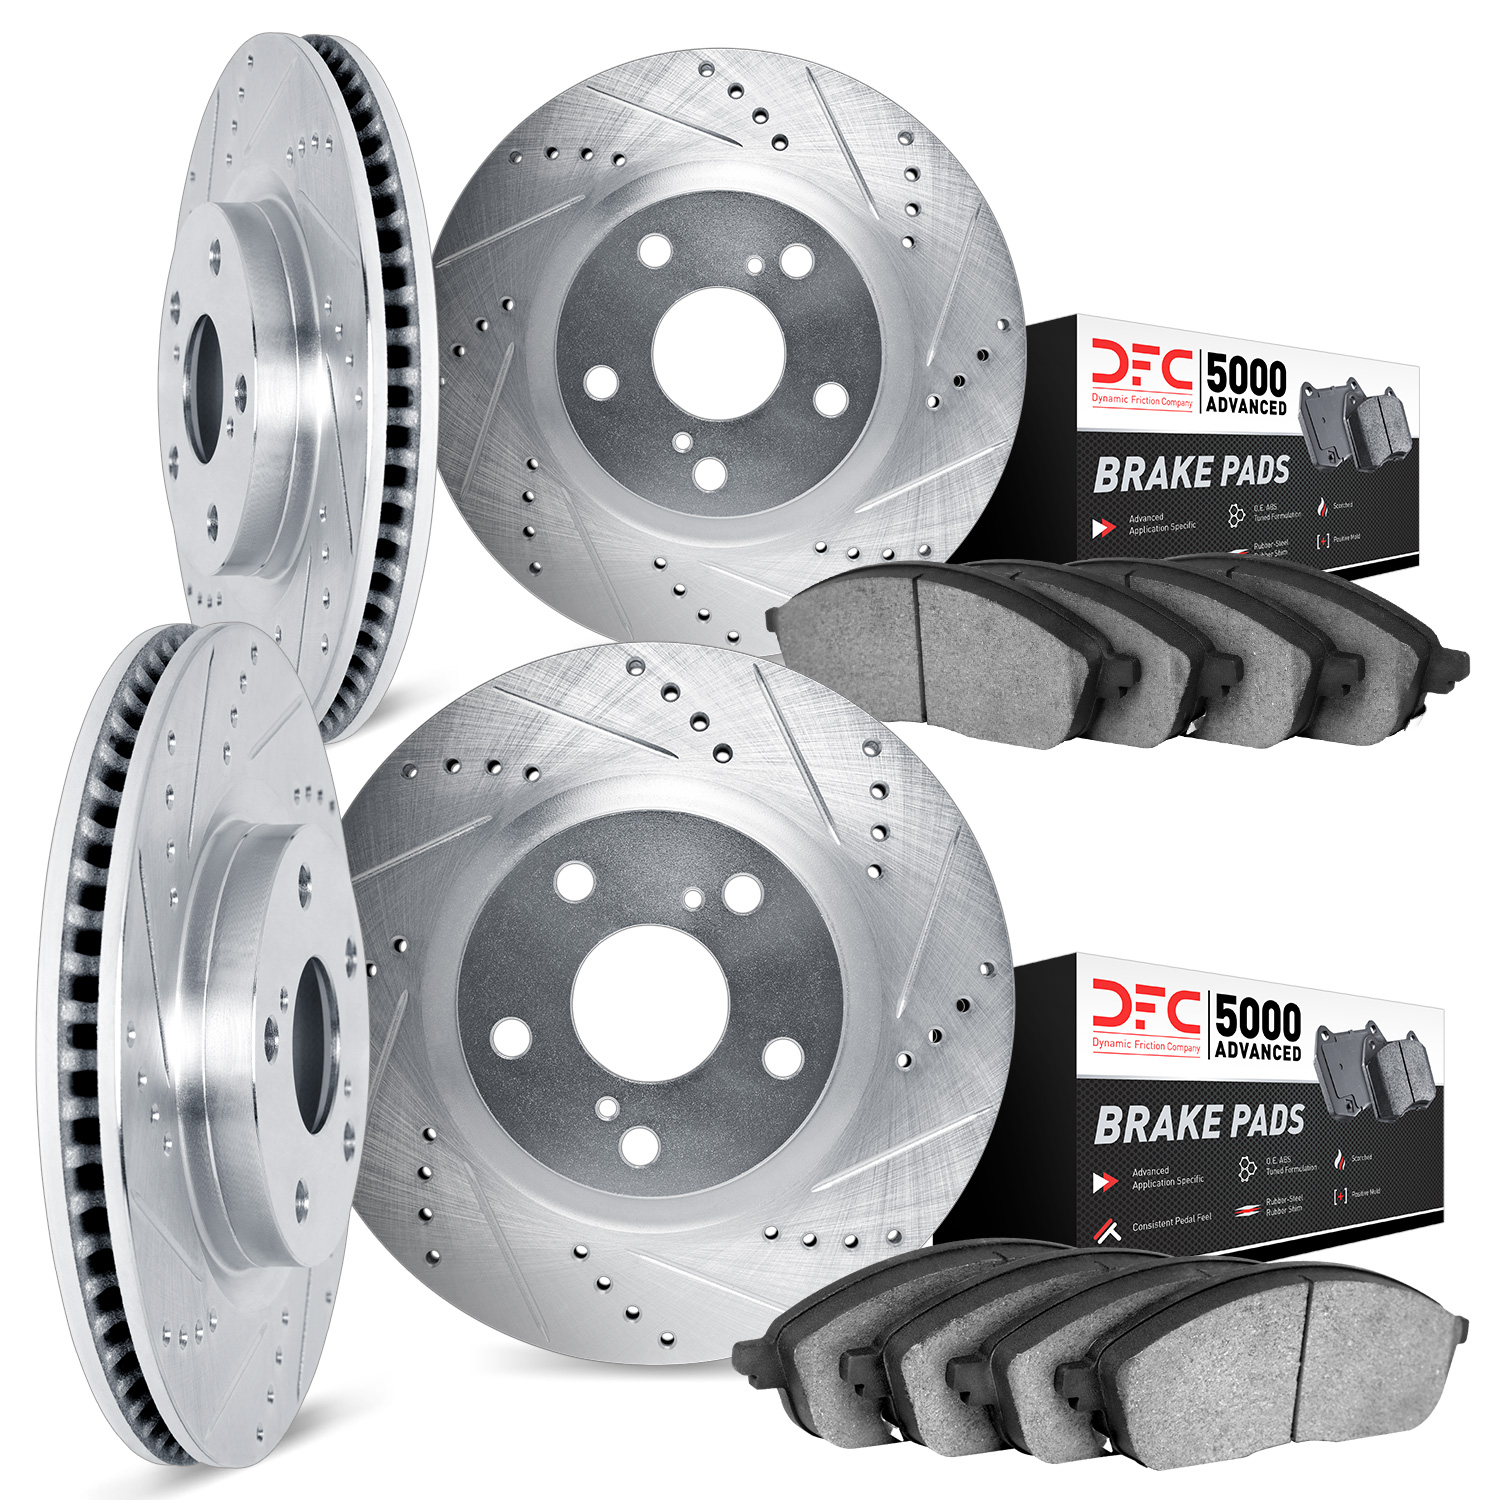 7504-31079 Drilled/Slotted Brake Rotors w/5000 Advanced Brake Pads Kit [Silver], 2017-2020 BMW, Position: Front and Rear